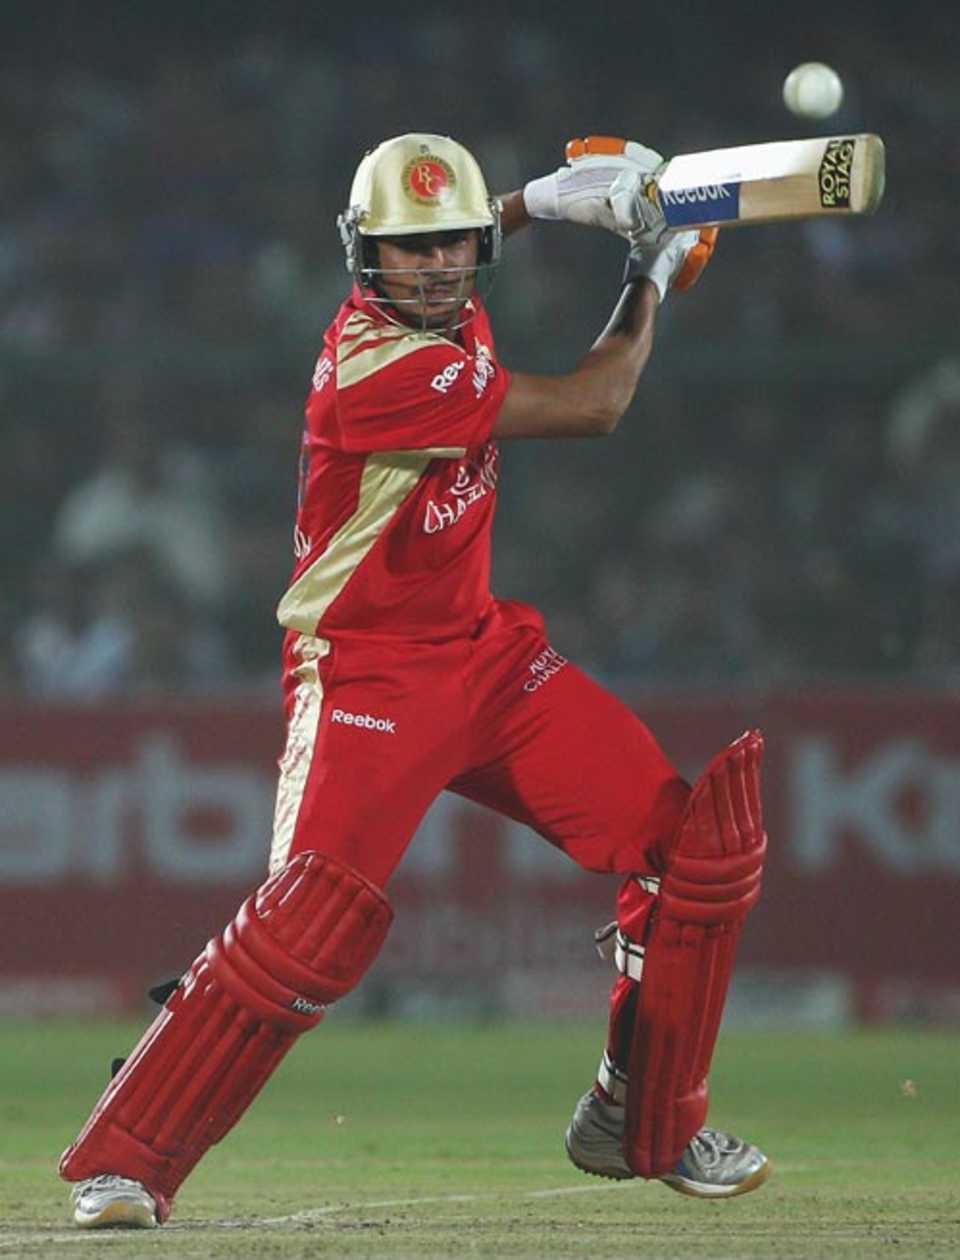 Manish Pandey steers the ball towards point